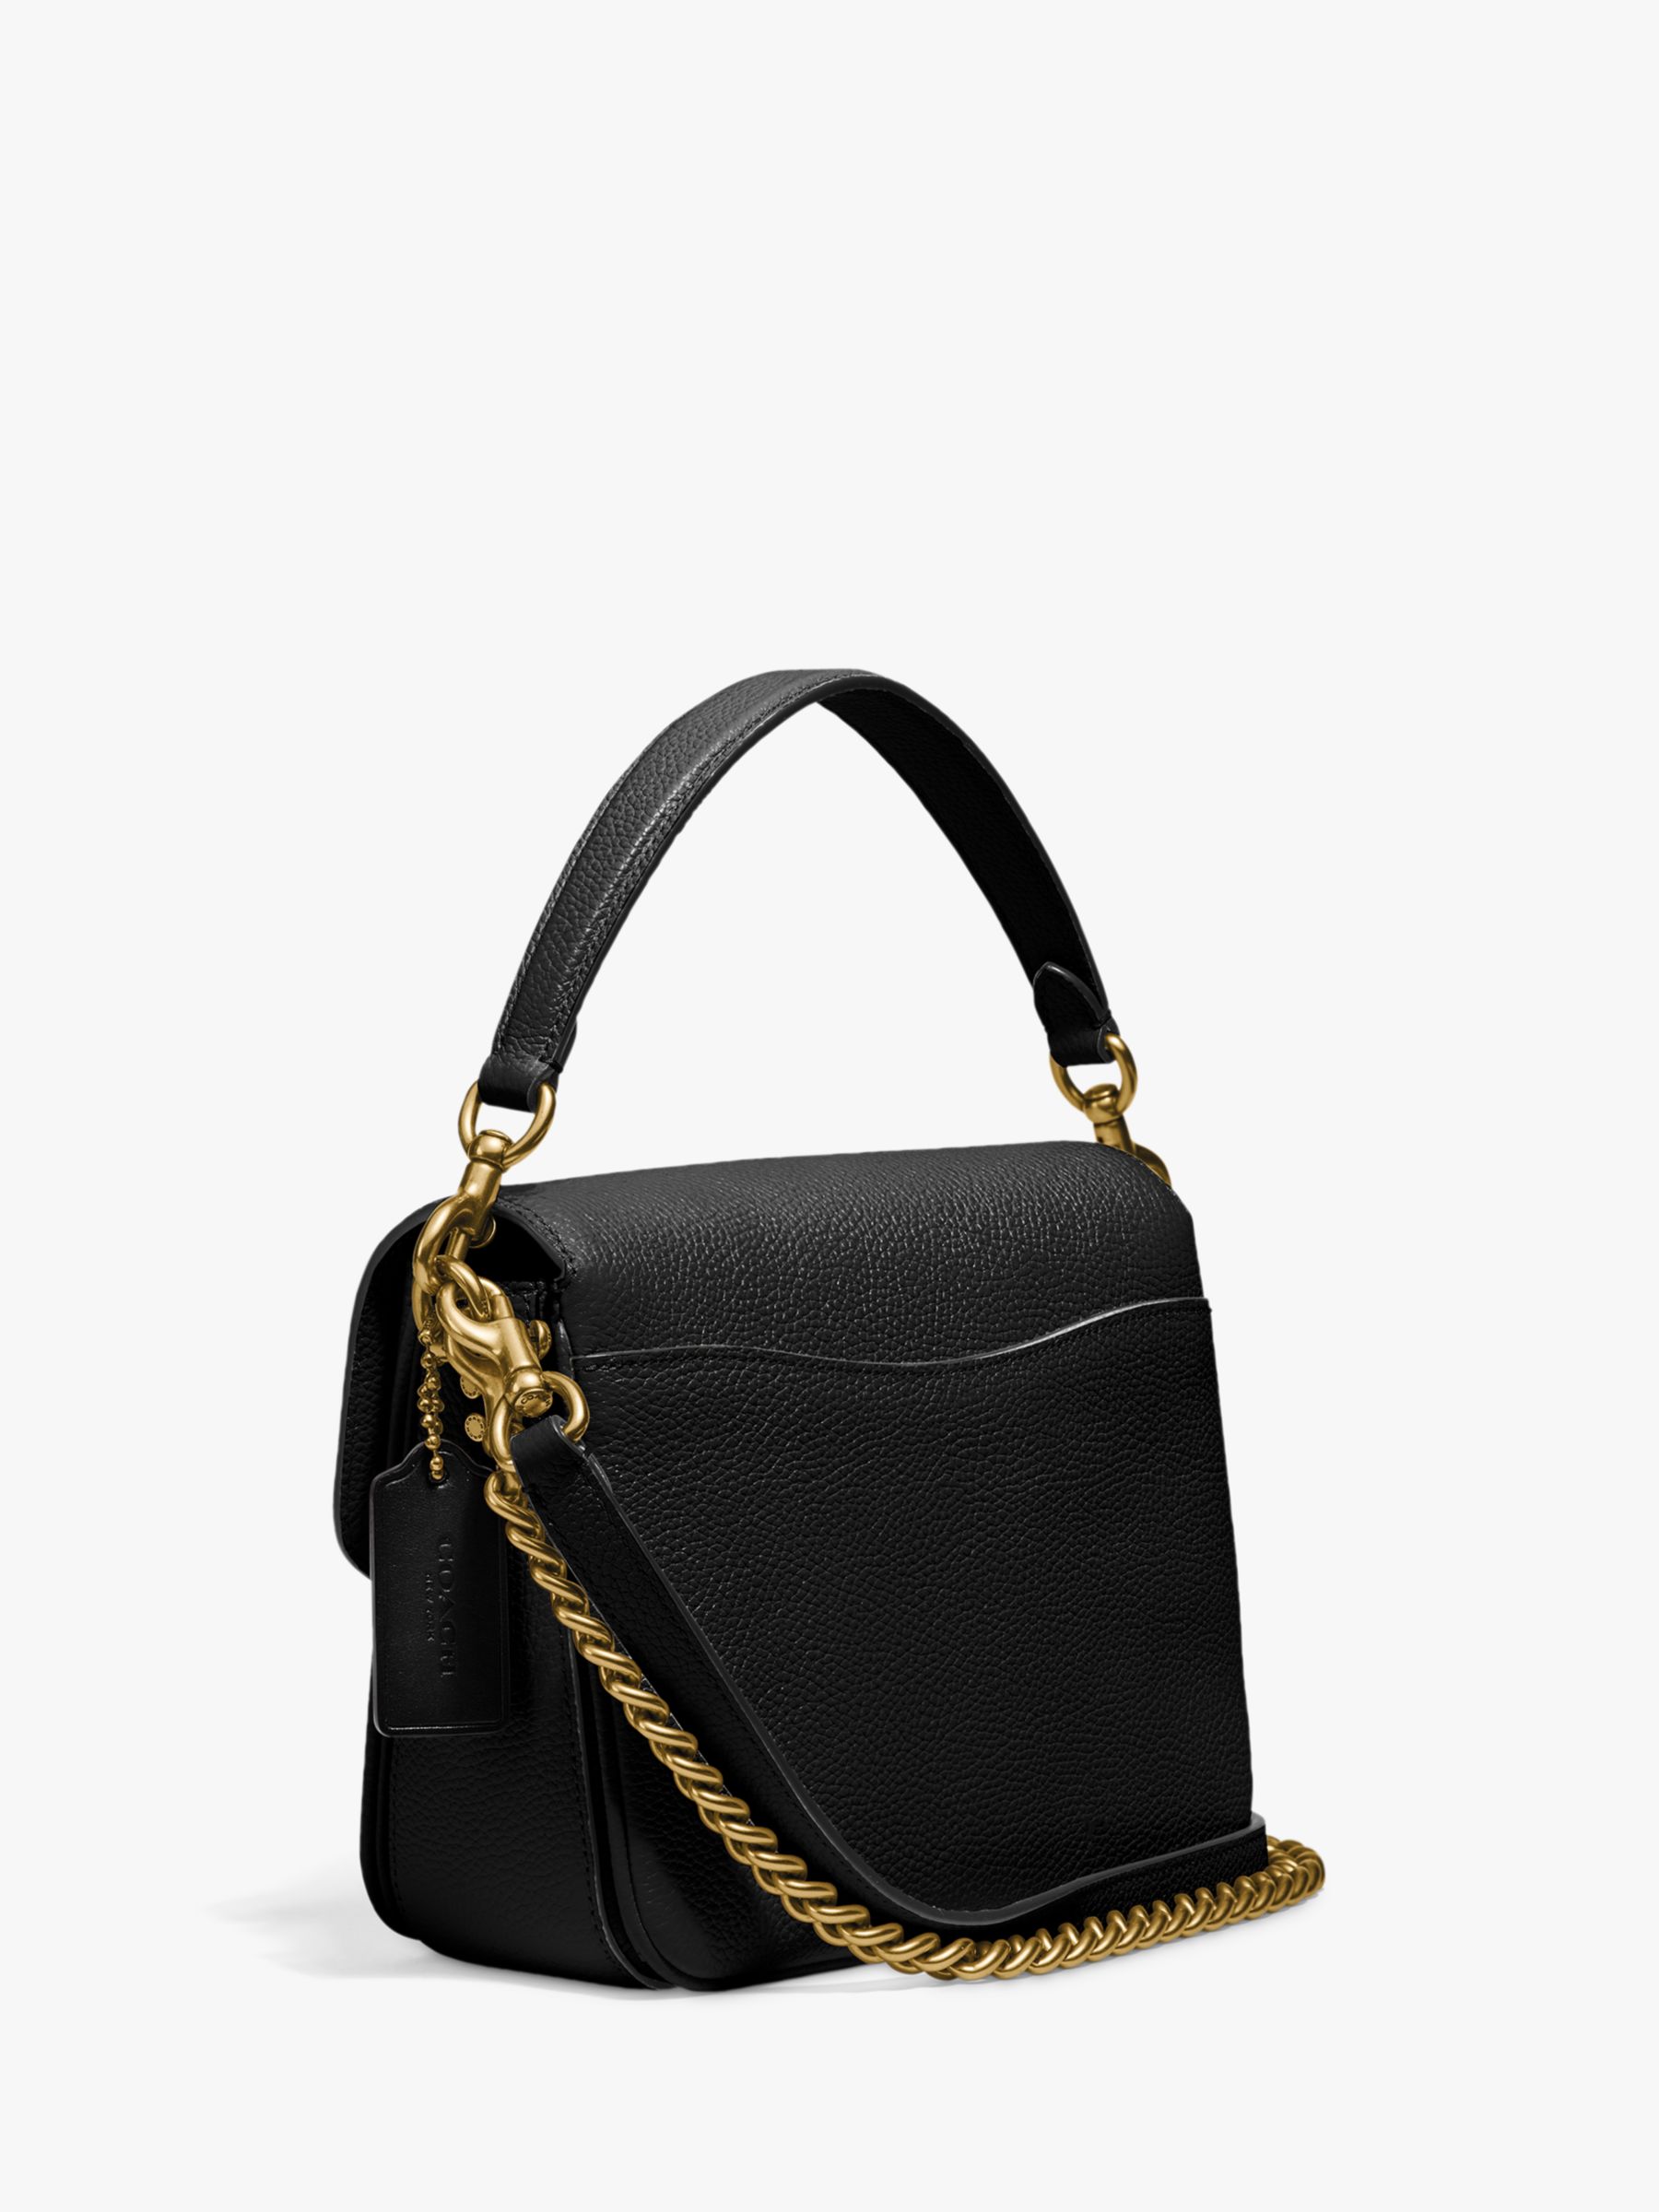 Coach's new Cassie crossbody bag is having a moment - Coffee and